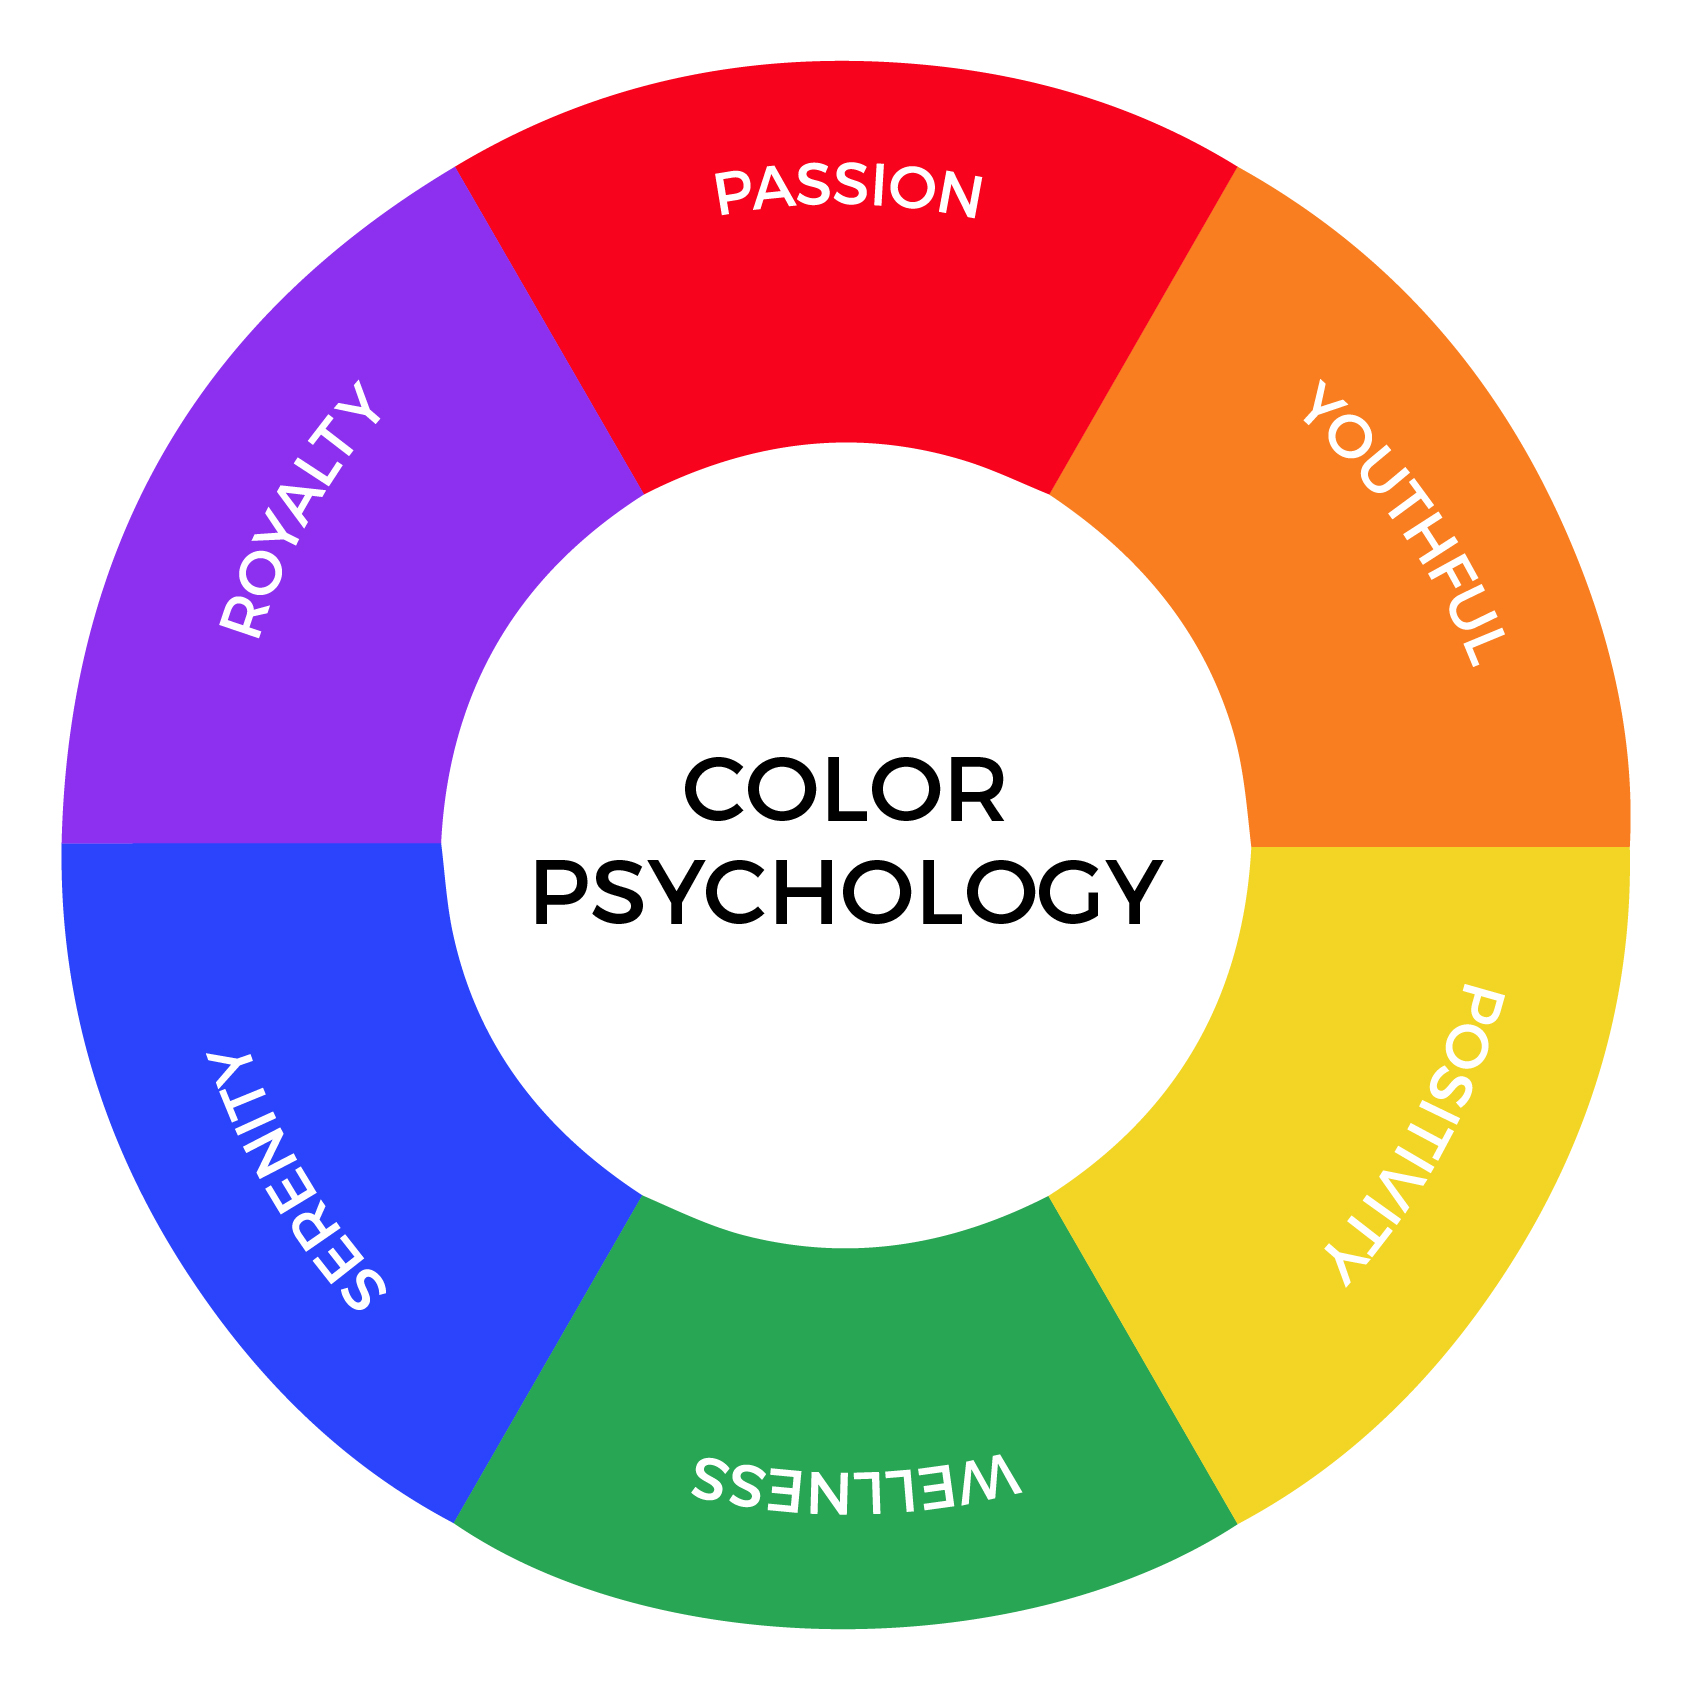 How to Choose Your Brand Color Palette — Selah Creative Co.